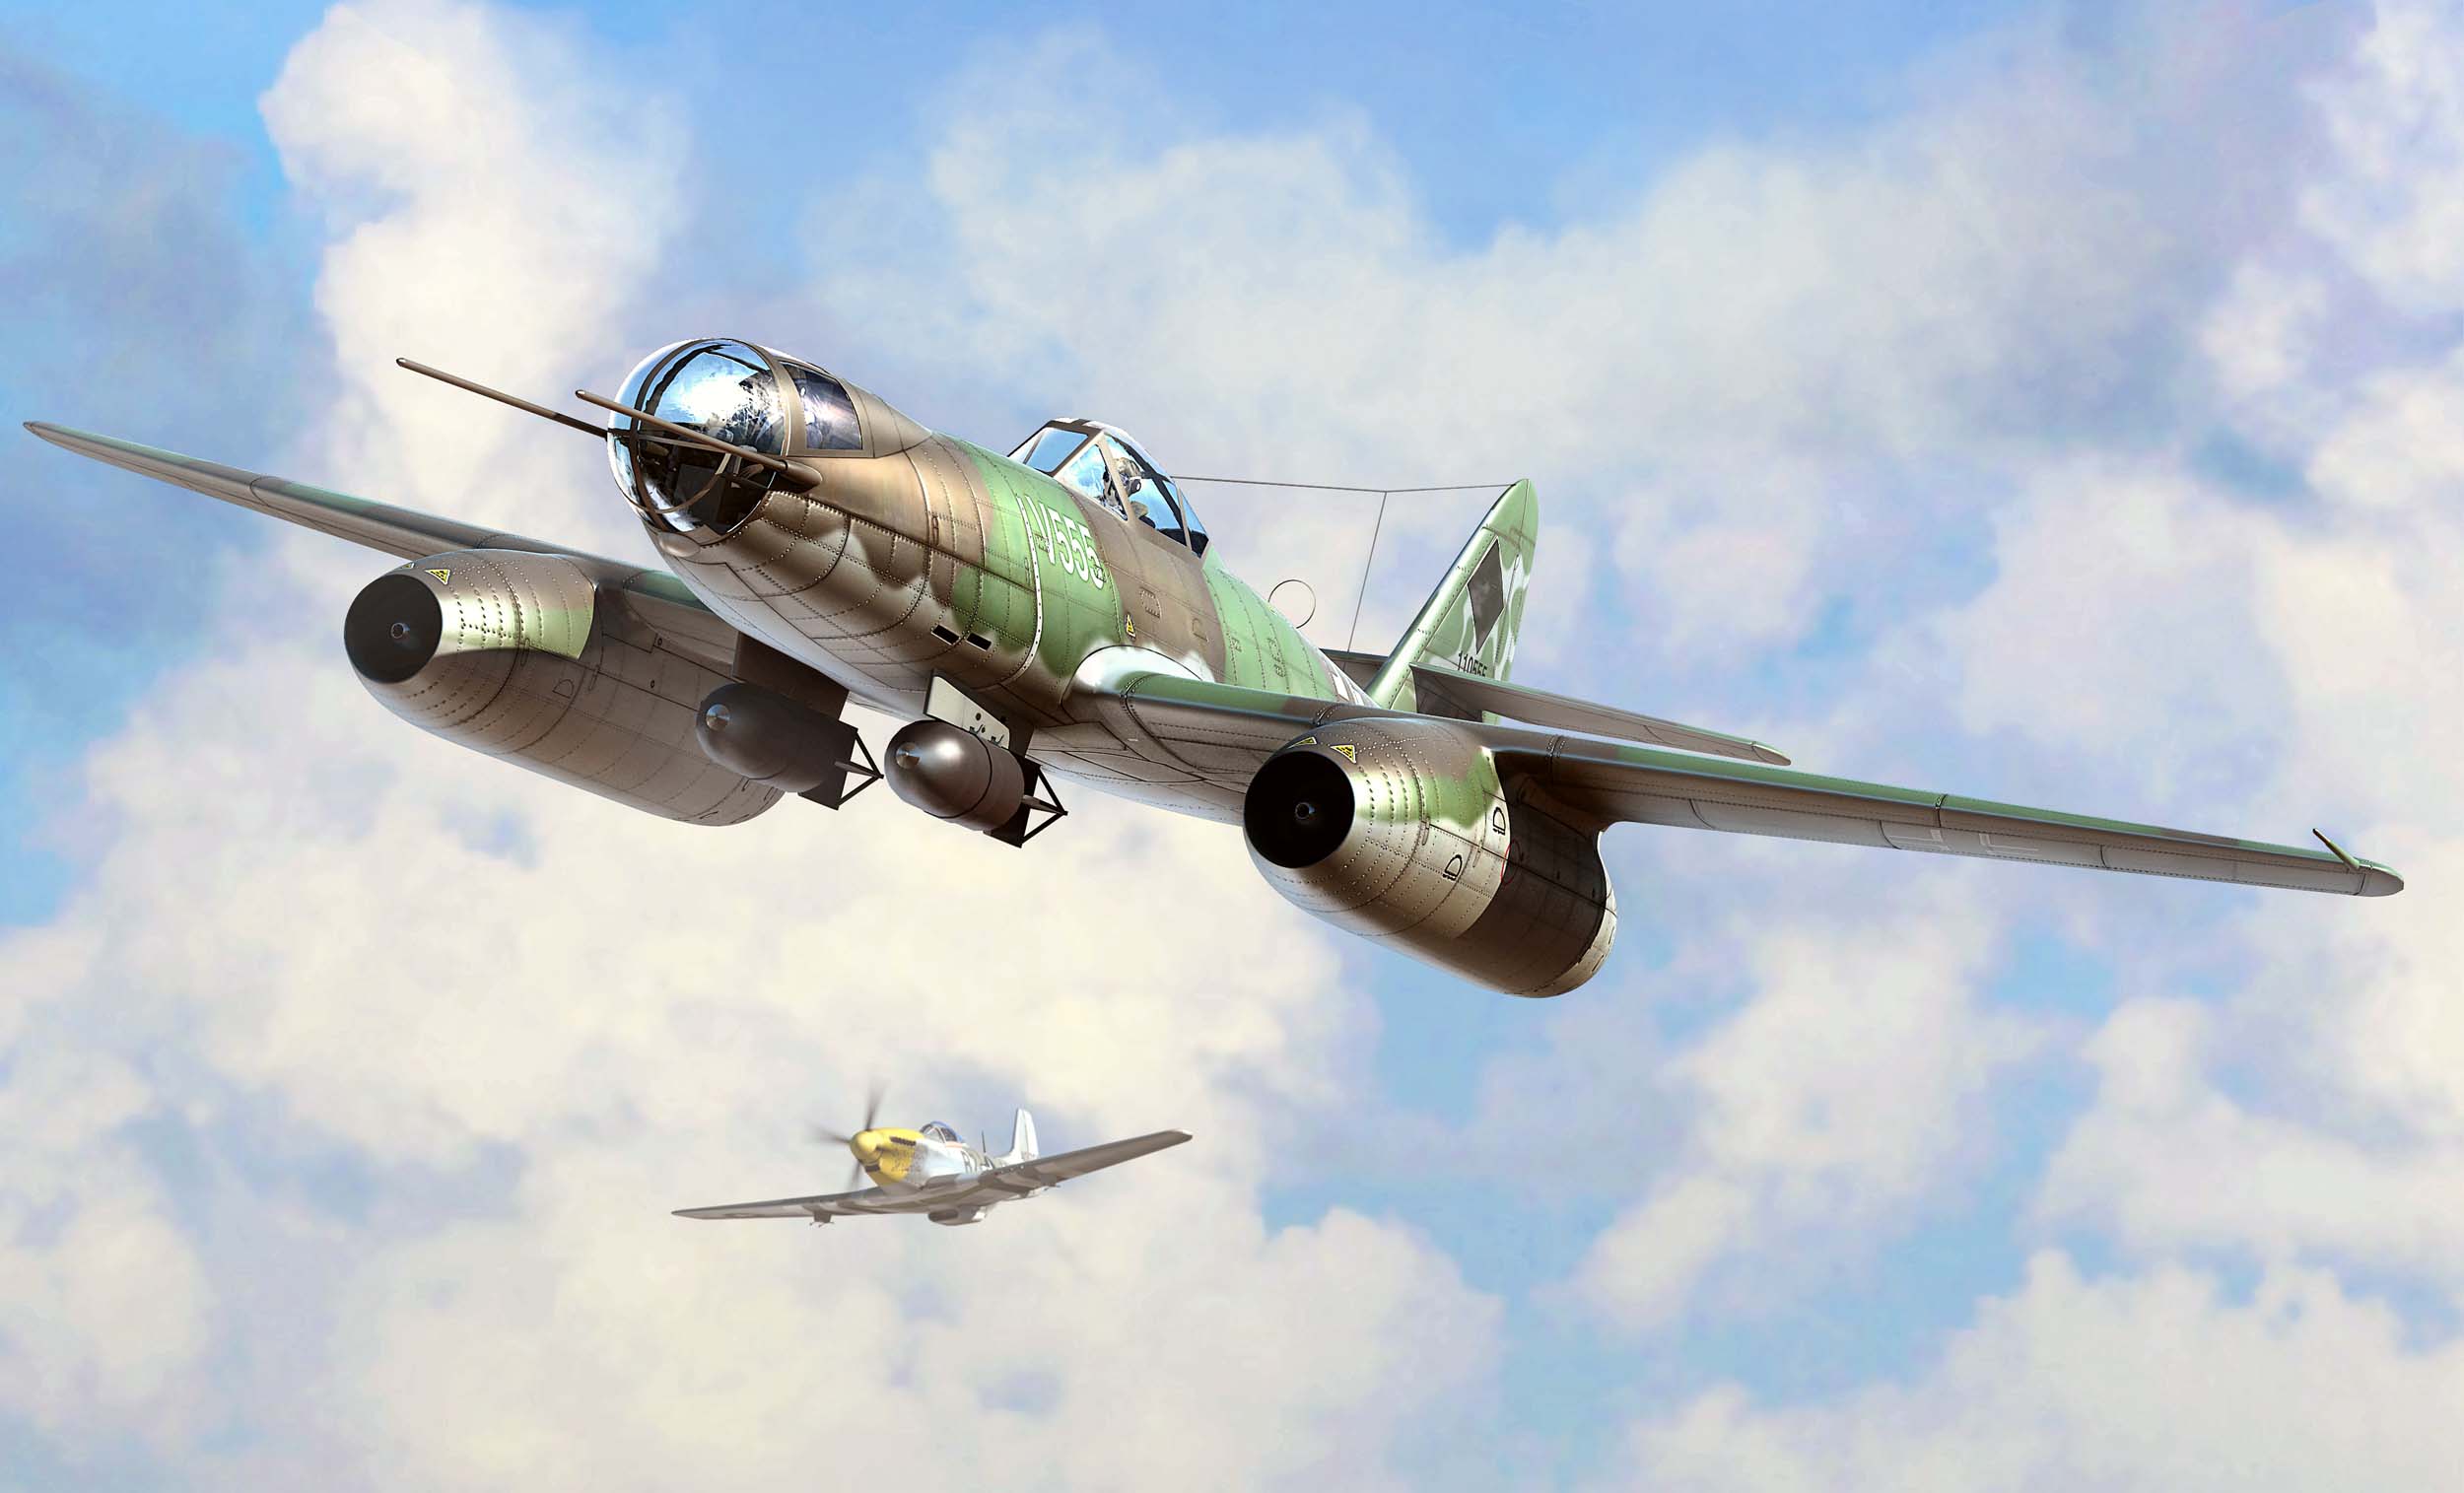 General 2500x1515 aircraft flying sky army military clouds artwork pilot military vehicle